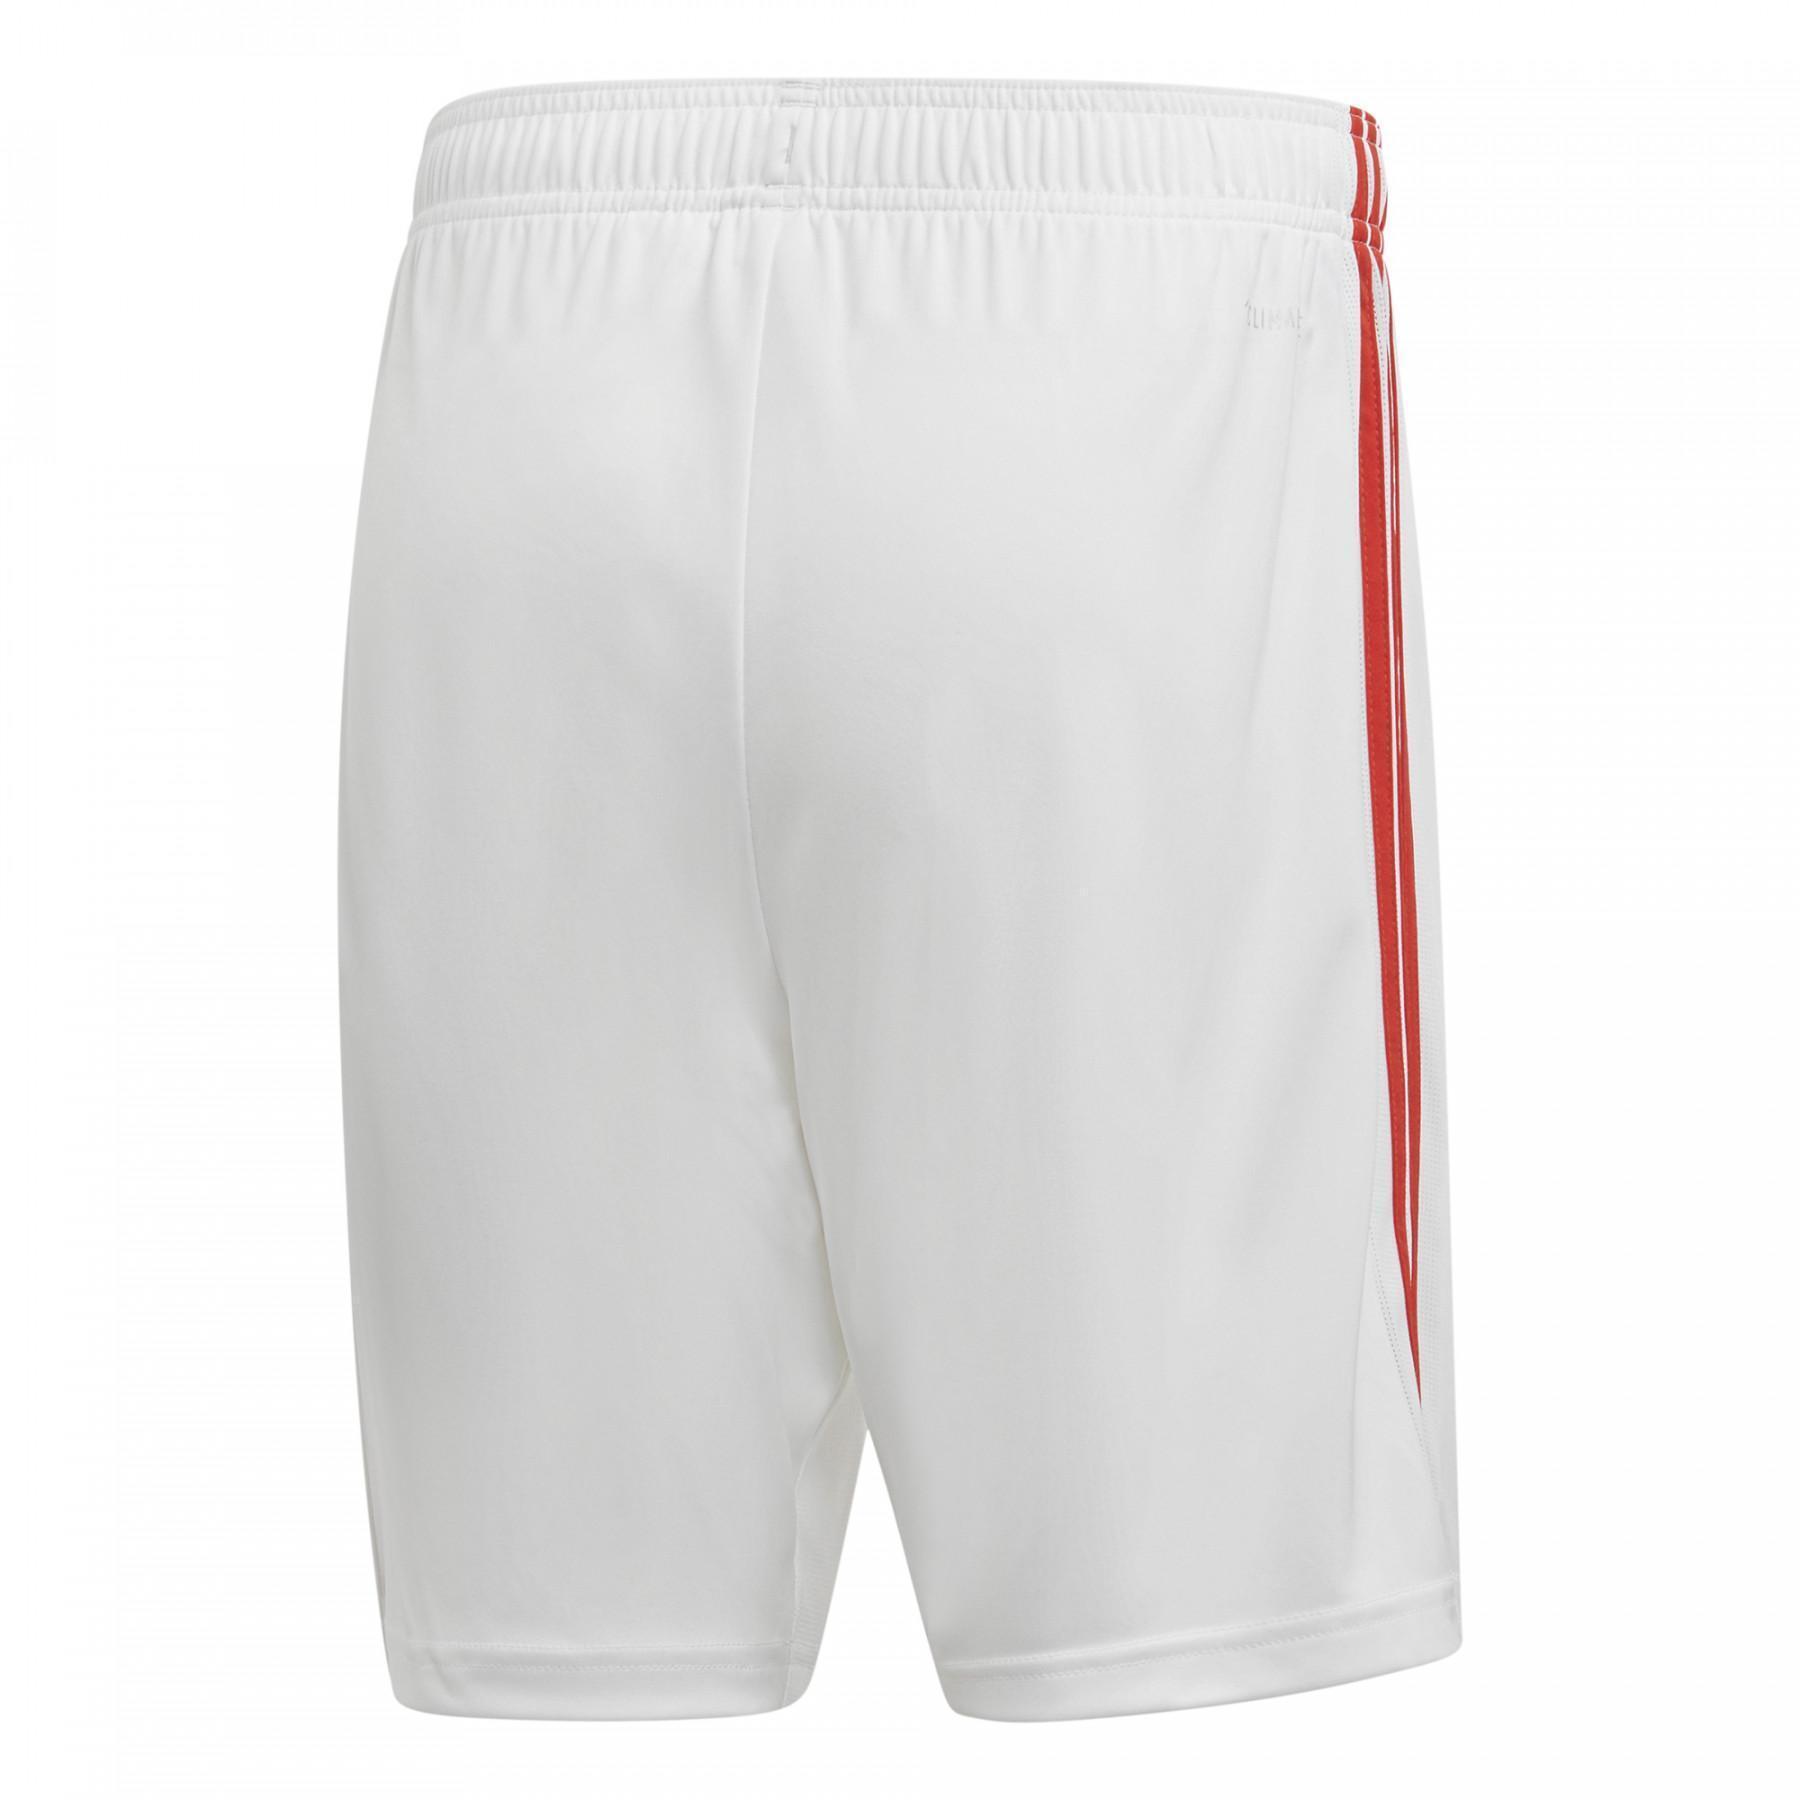 Home shorts Benfica 2019/20